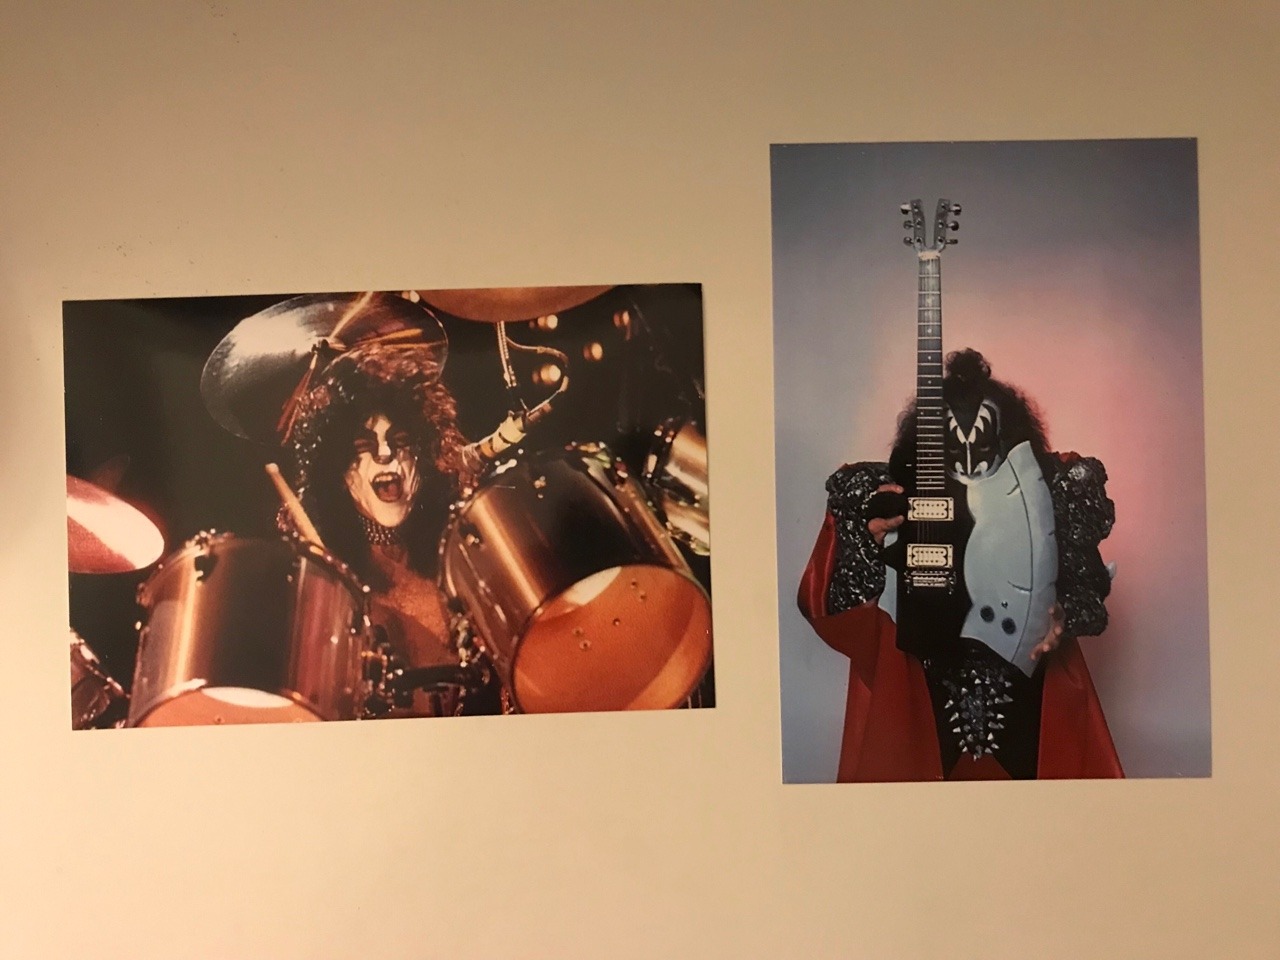 ajakkson:  So excited to hang these bad boys up!! I bought the Eric Carr print (which